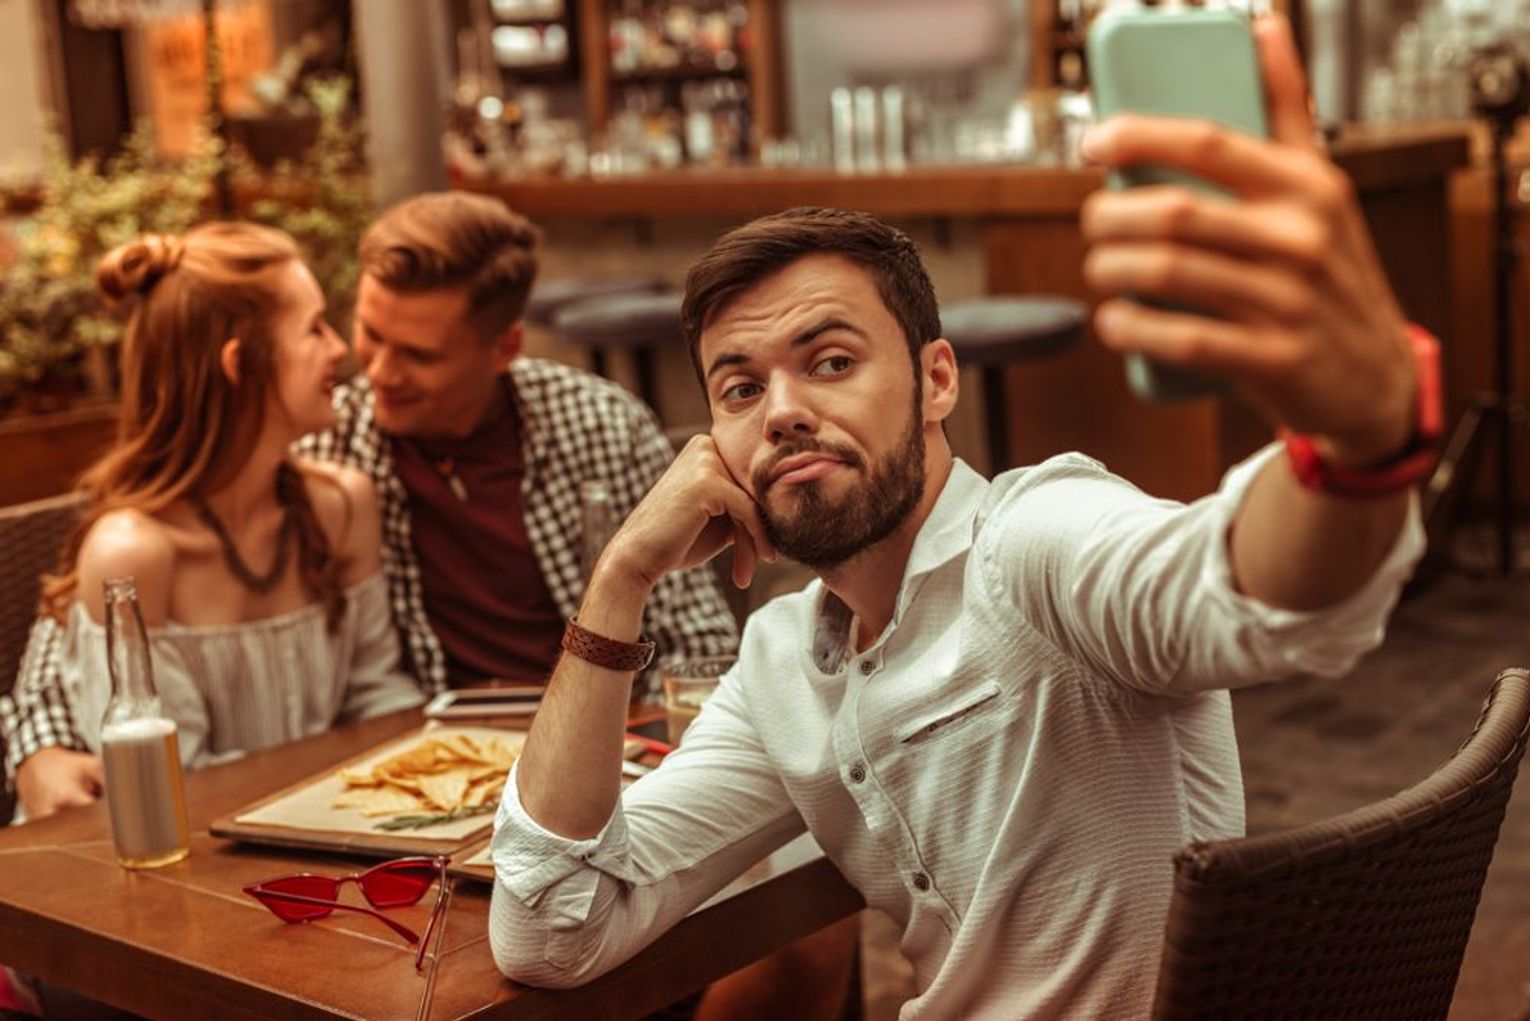 How to Avoid Being the Third Wheel?